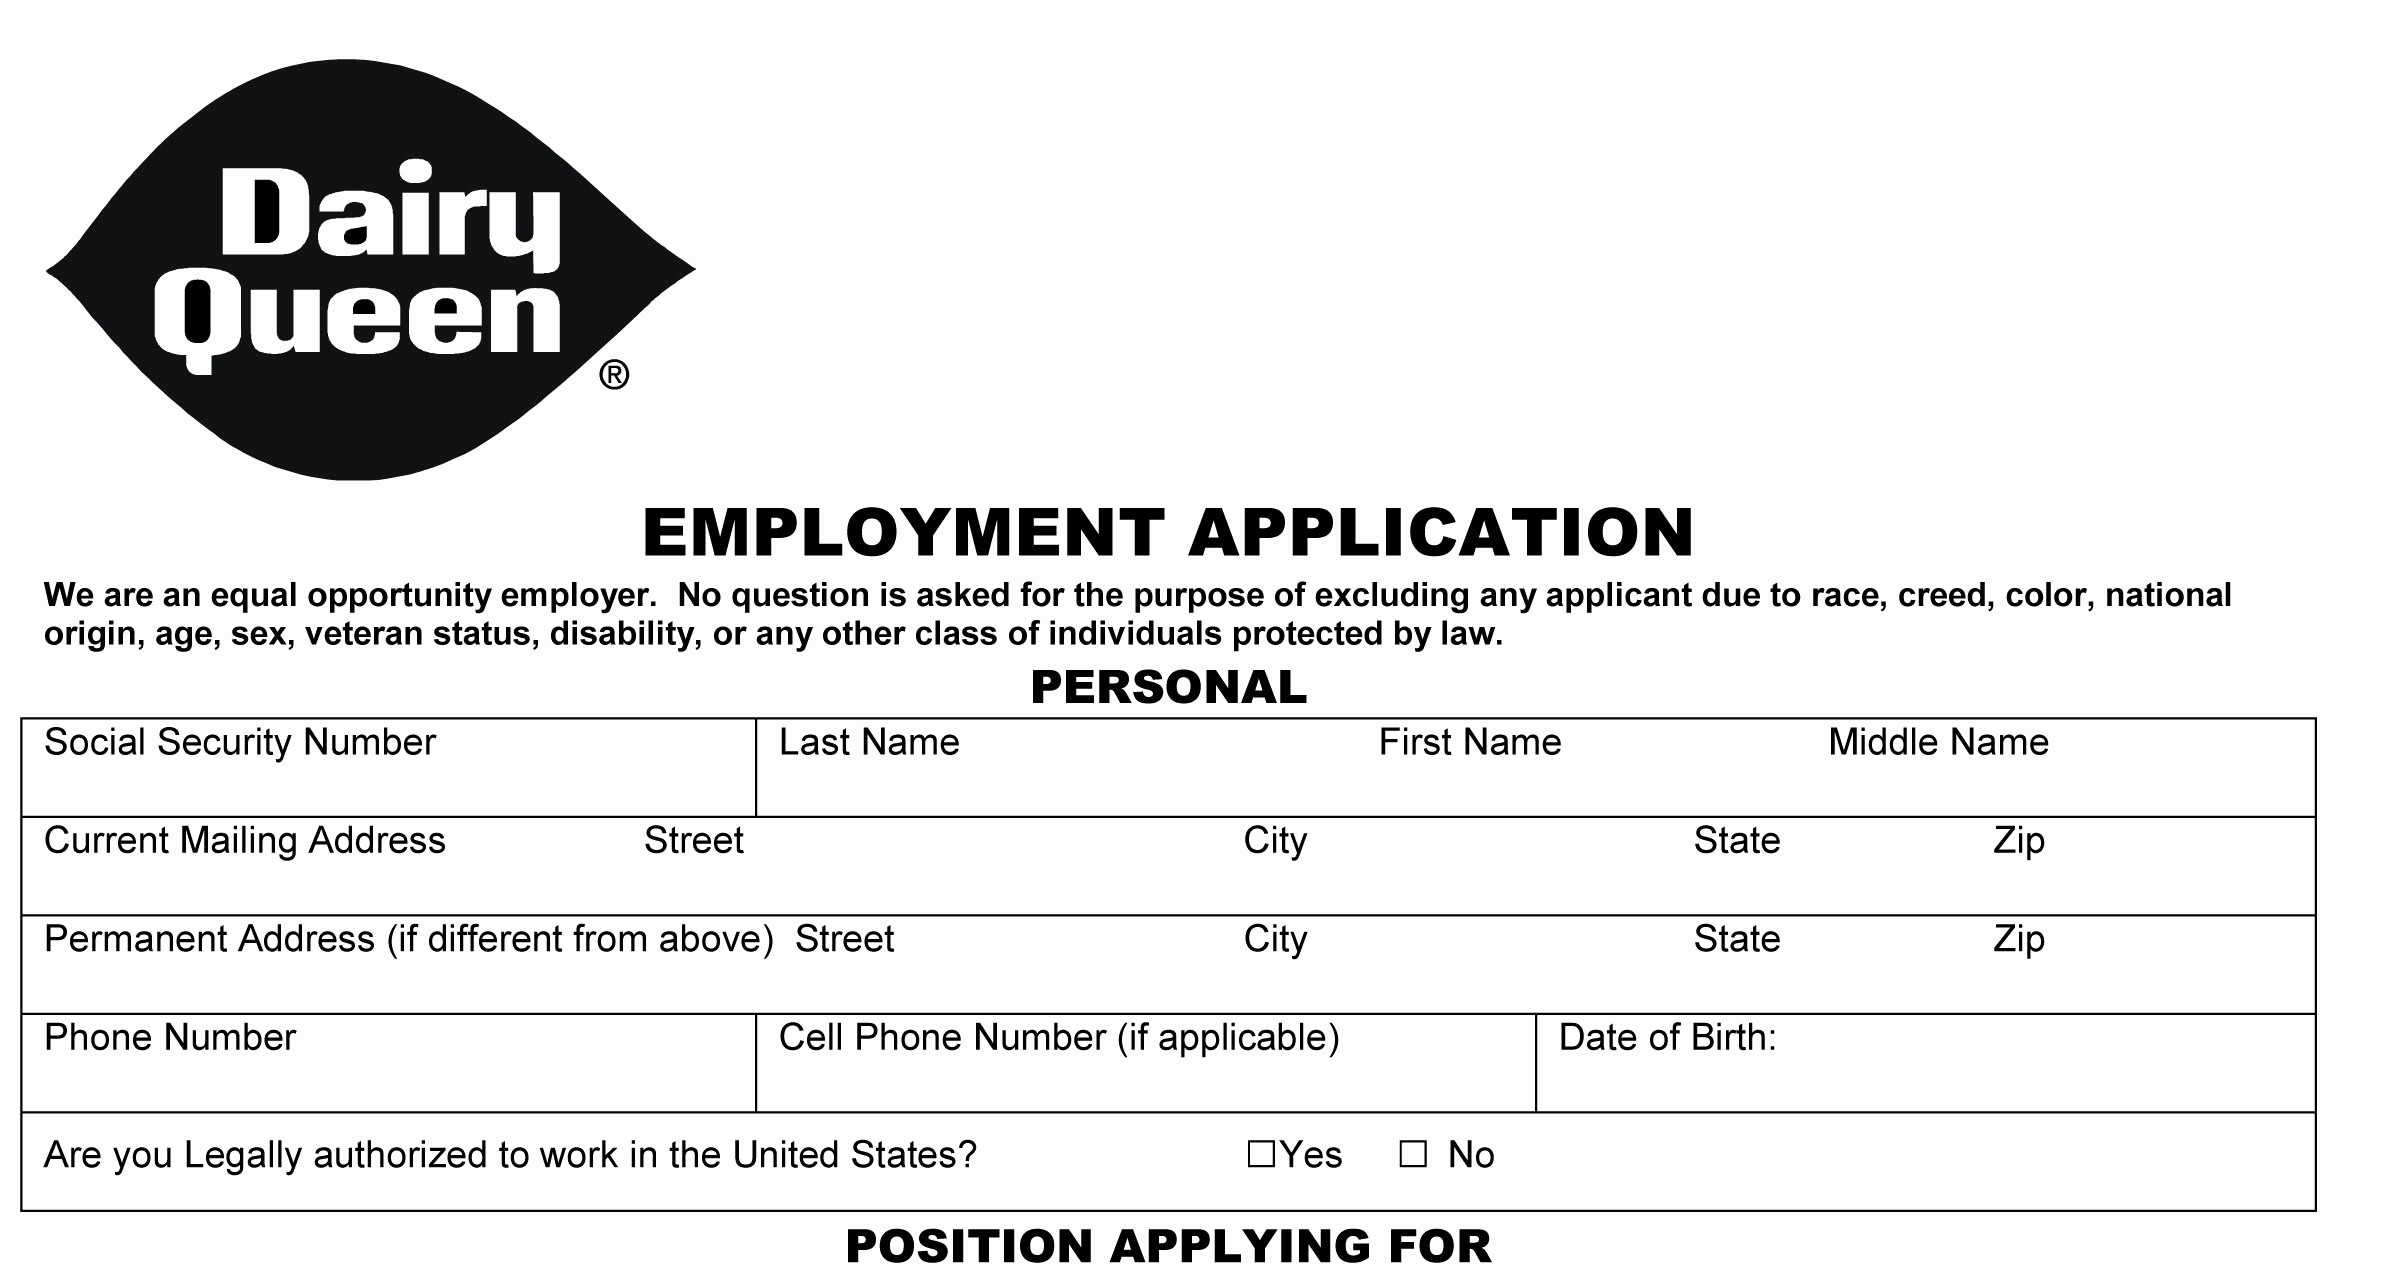 Application for Employment form Pdf Awesome Dairy Queen Job Application Printable Employment Pdf forms